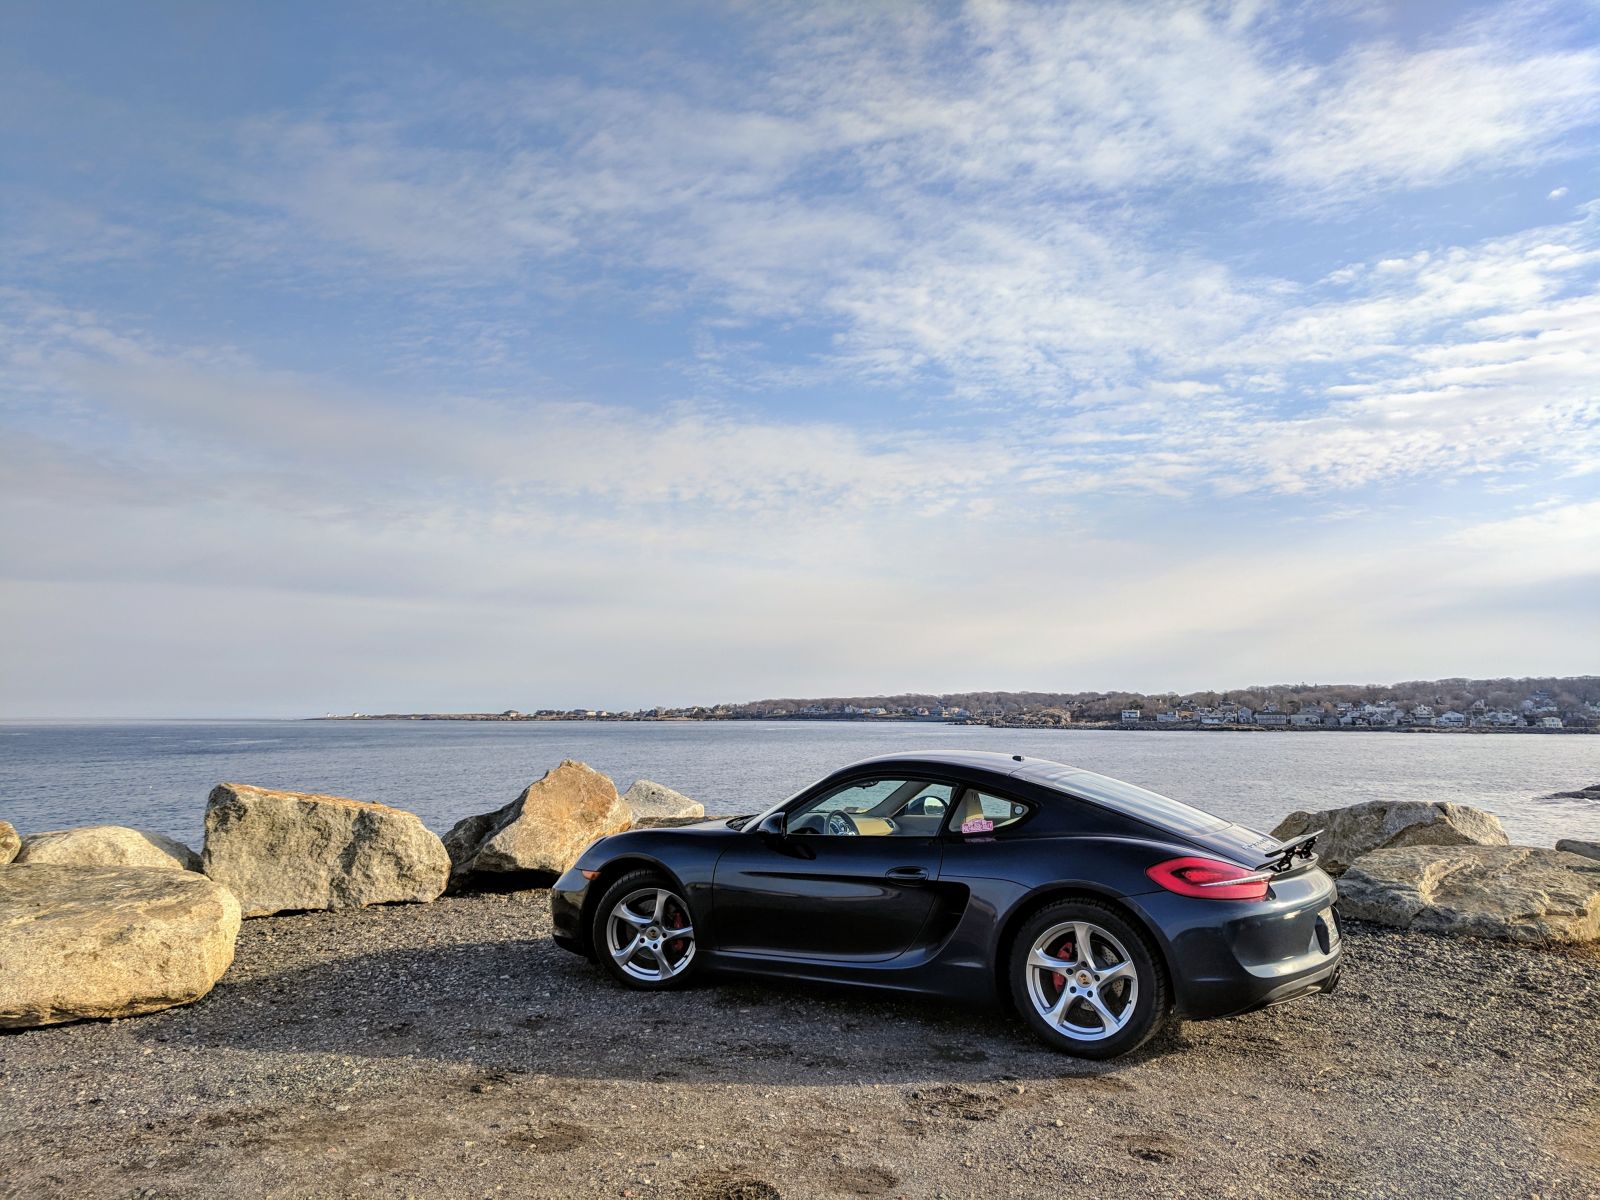 Illustration for article titled Porsche Cayman S 2 Year AMA: ANSWERS